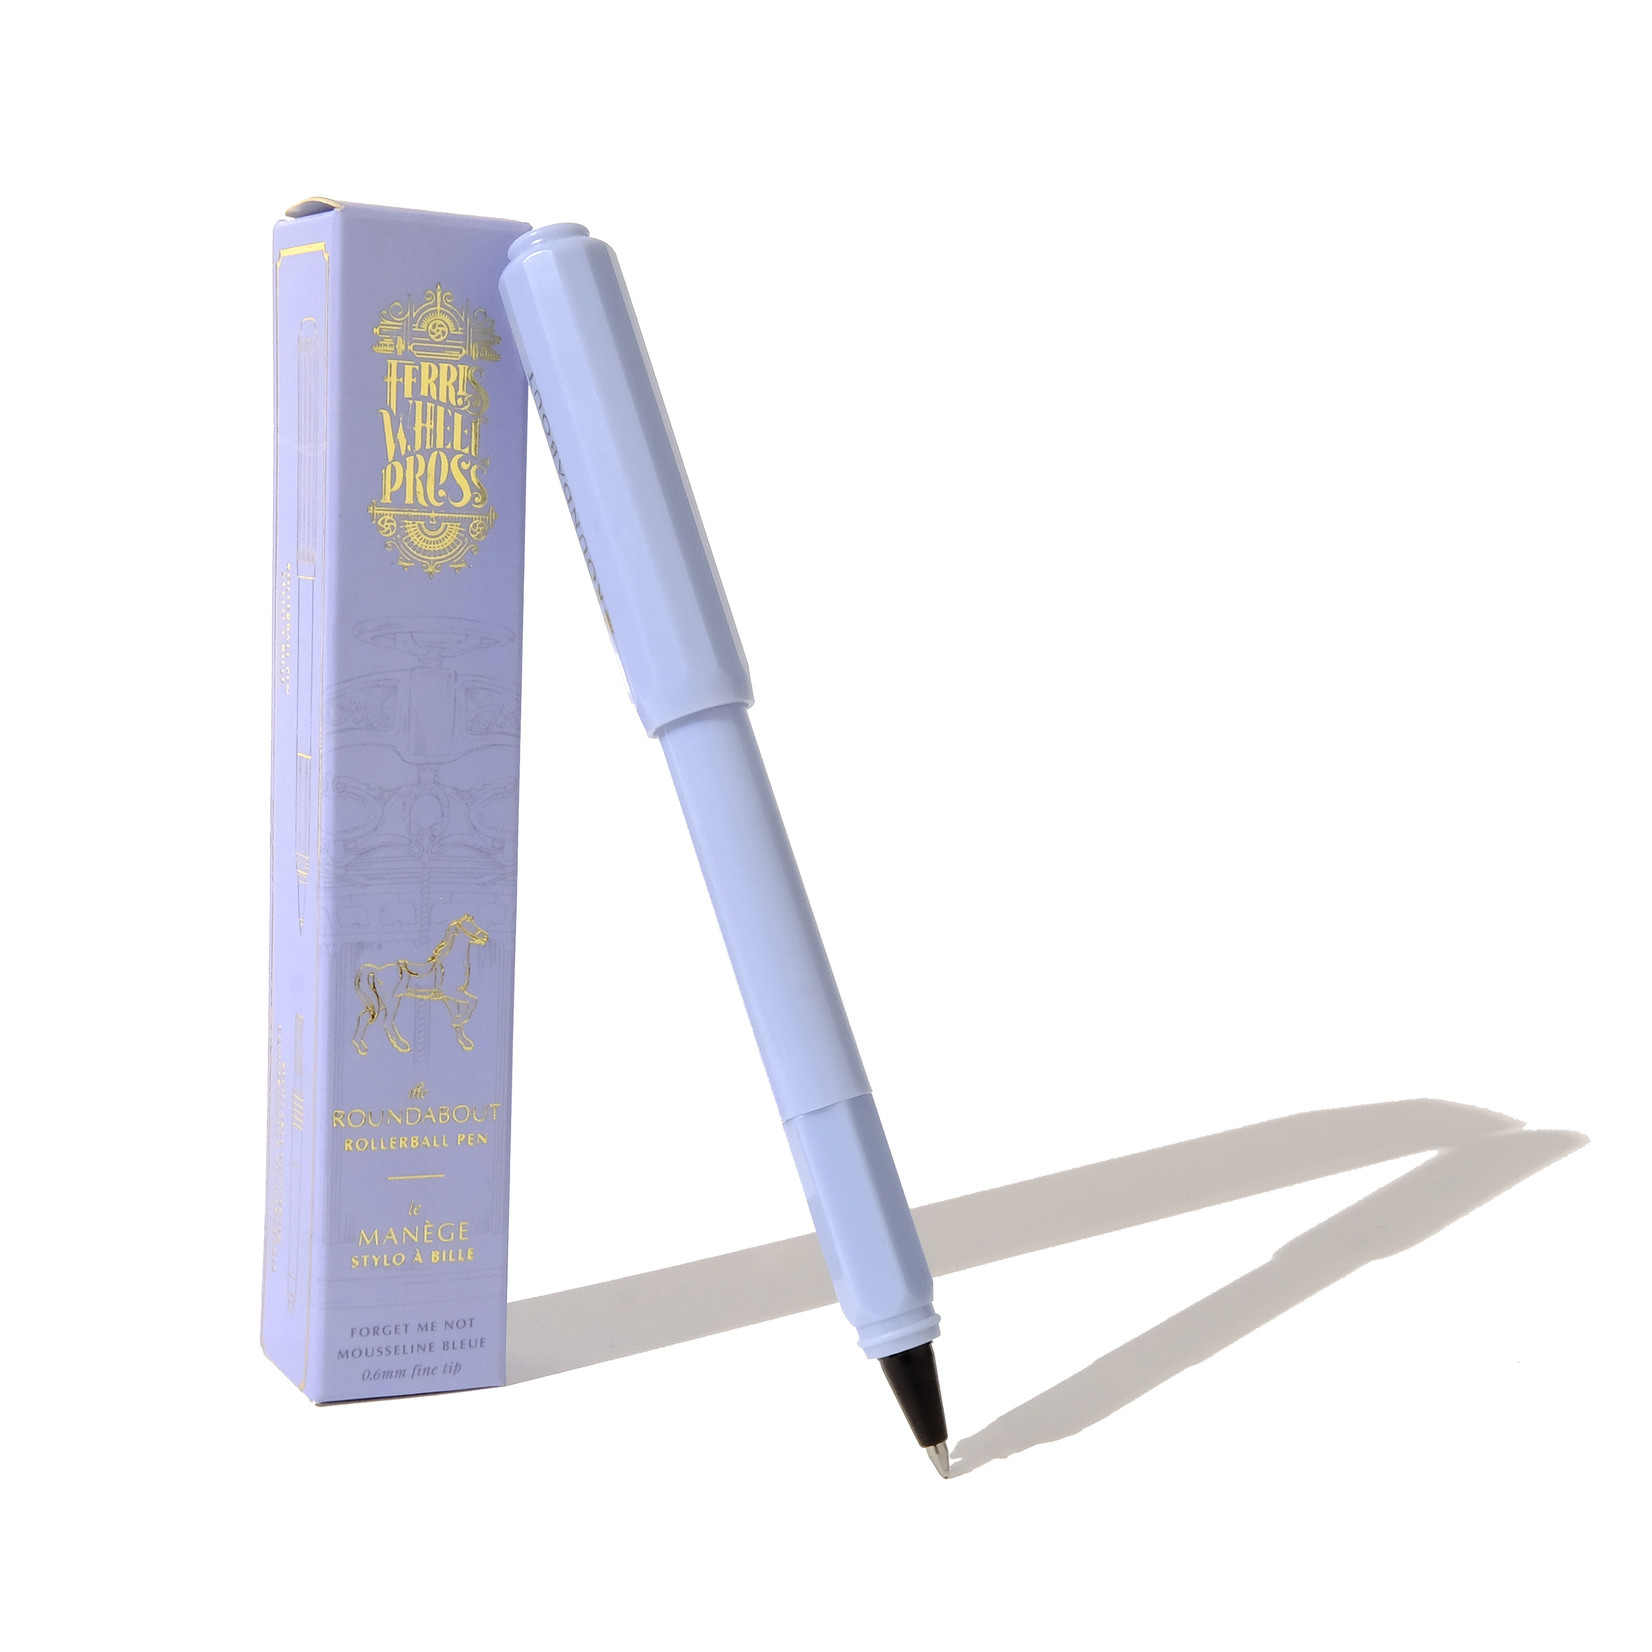 FERRIS WHEEL PRESS ROUNDABOUT ROLLERBALL PEN 0.6MM FINE FORGET ME NOT